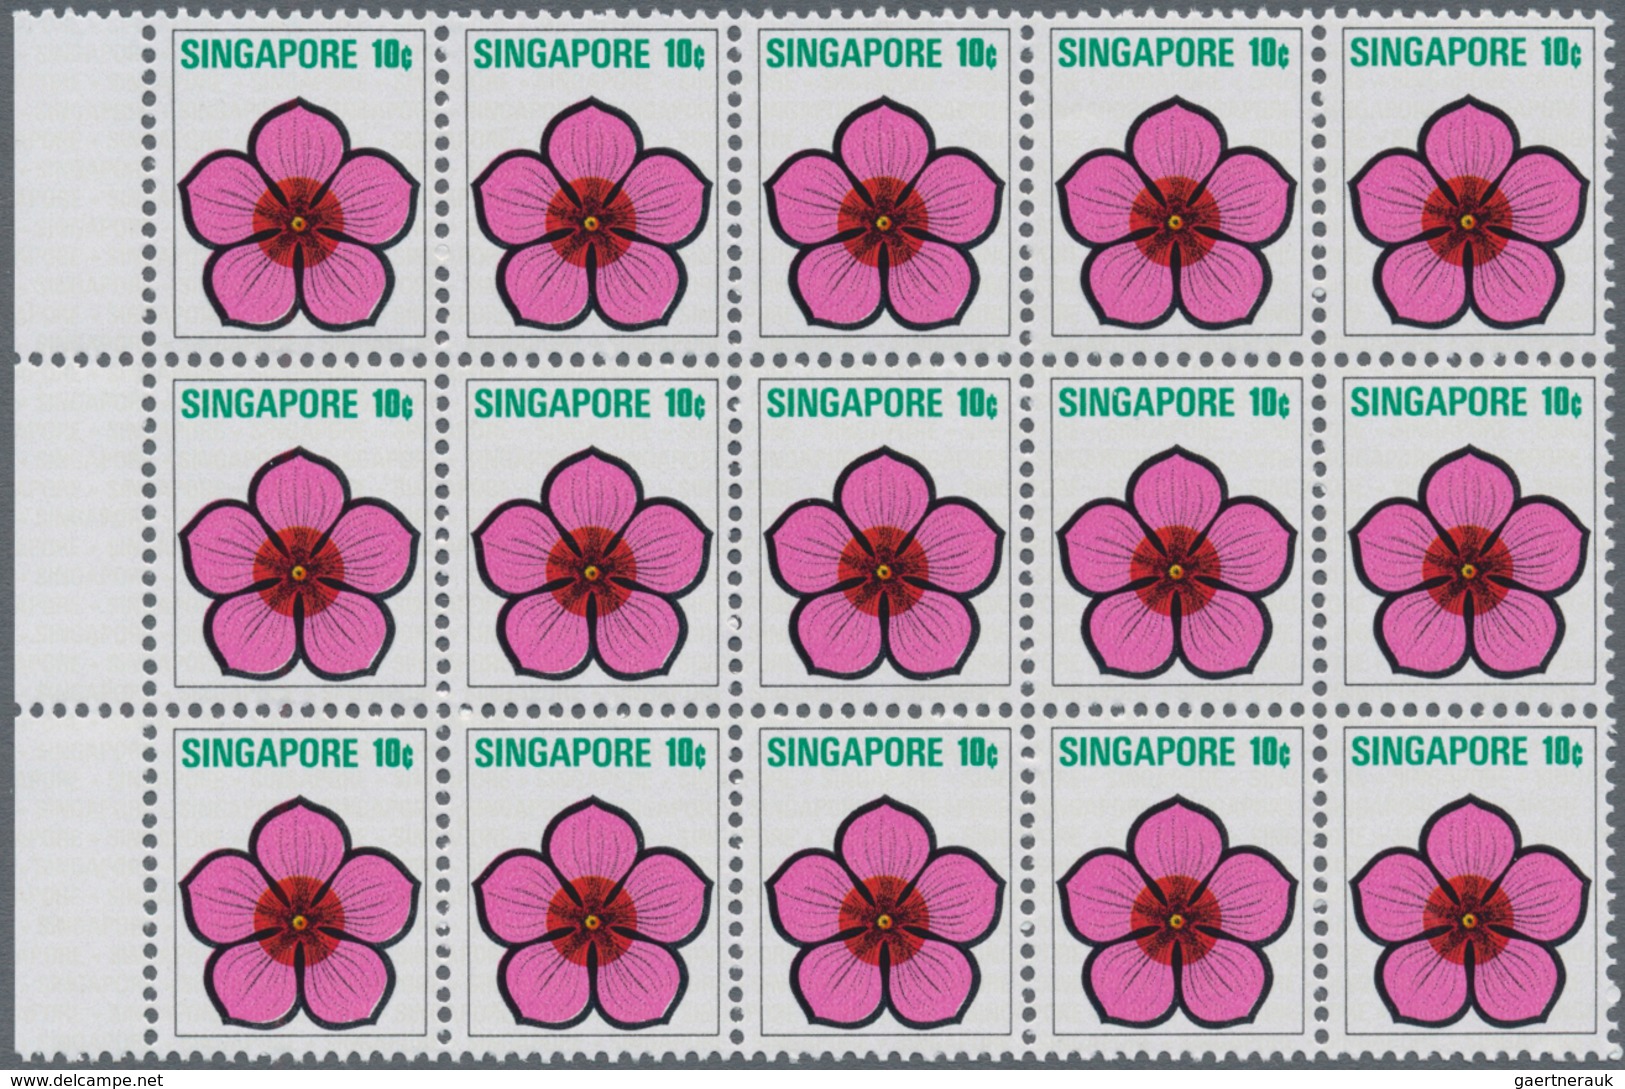 Singapur: 1973, Flowers and Fruits defintives complete set of 13 in blocks of 15, mint never hinged,